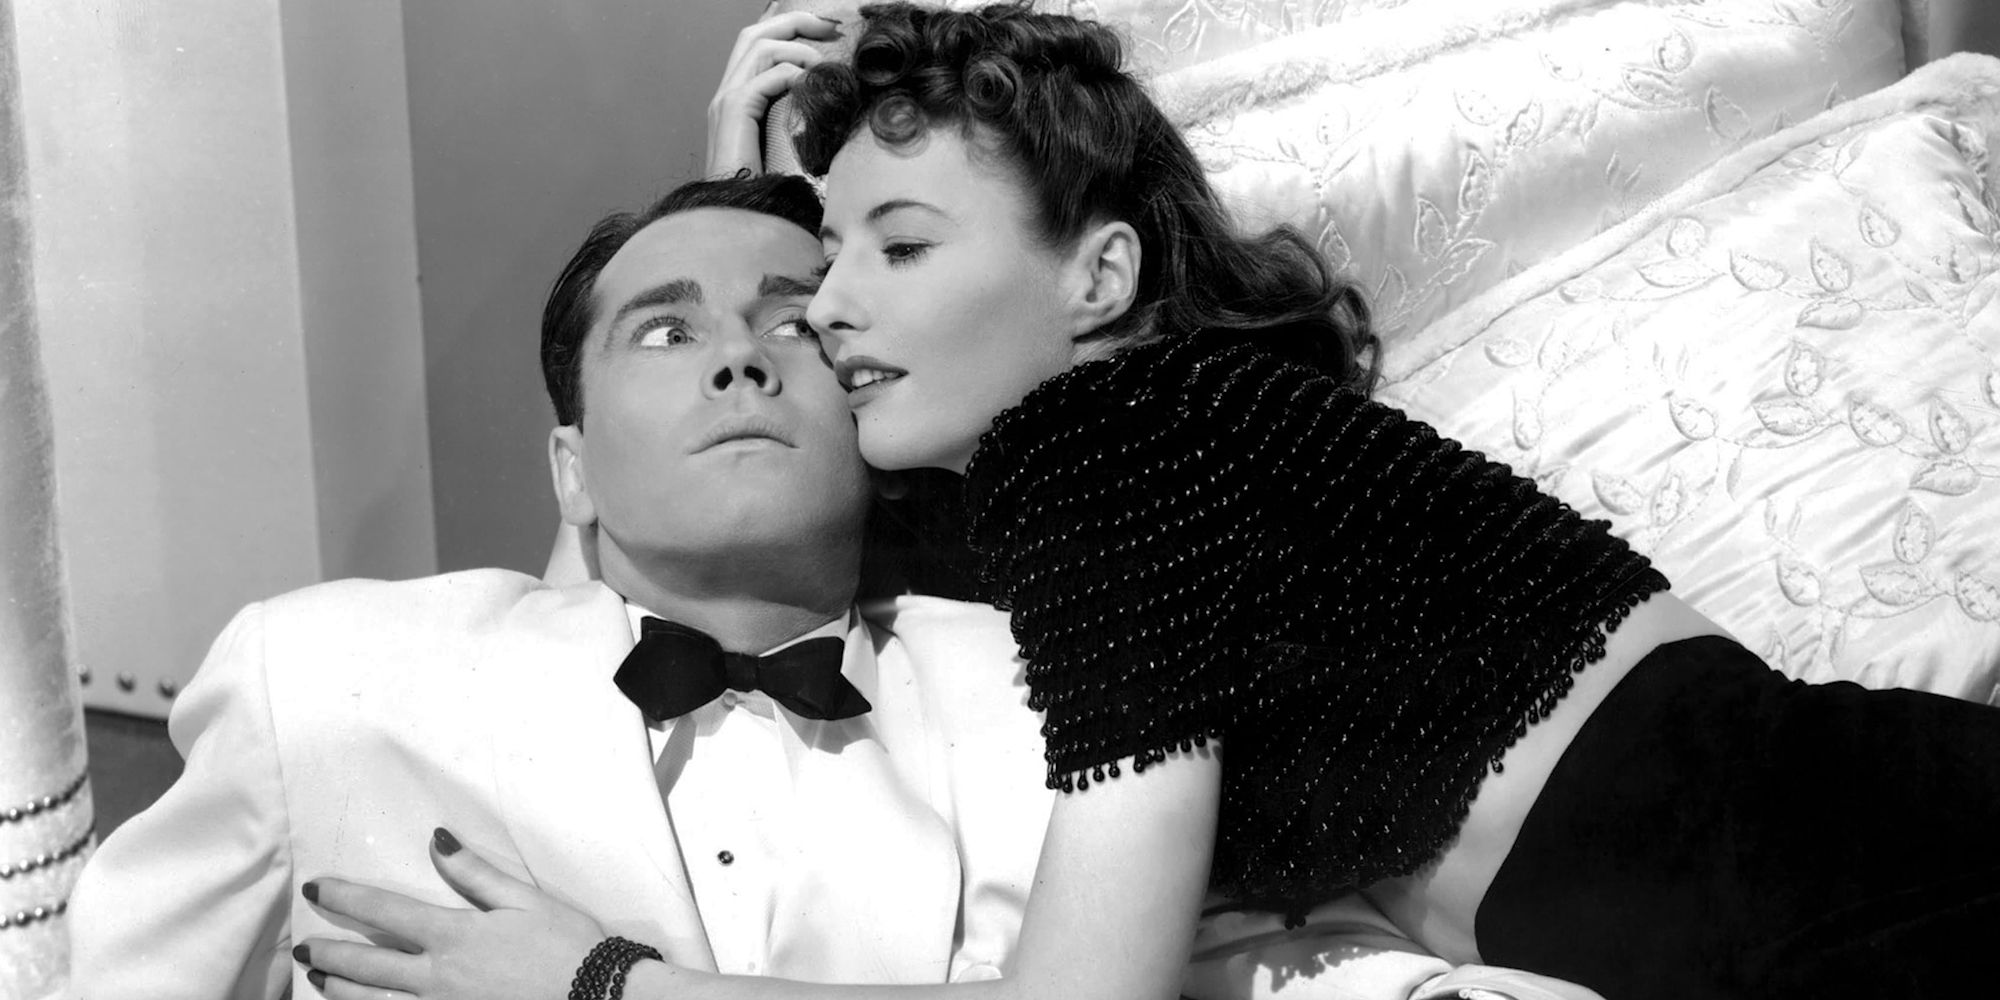 Henry Fonda and Barbara Stanwyck as Charles and Jean embracing in The Lady Eve